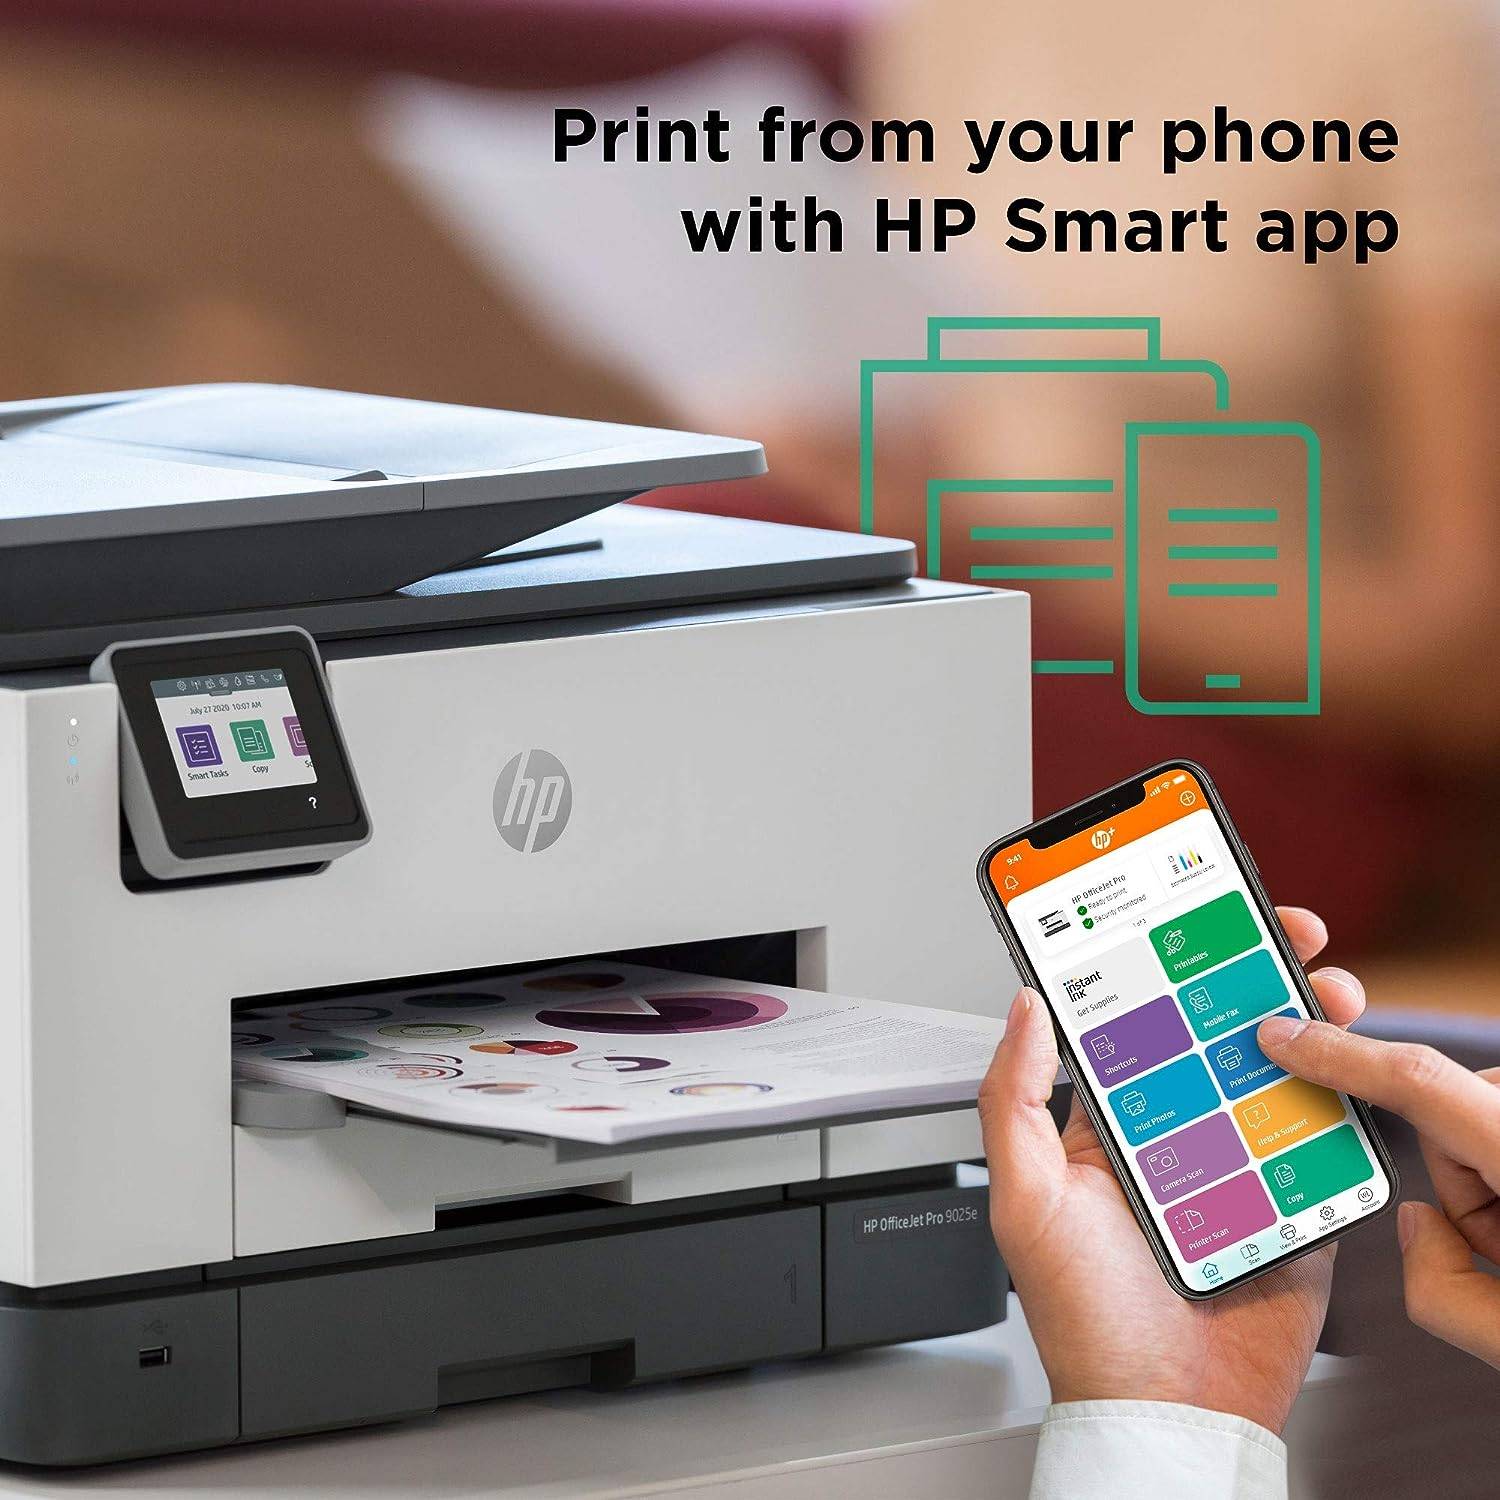 HP OfficeJet Pro 8210 Printer w/4 months ink included with HP Instant ink